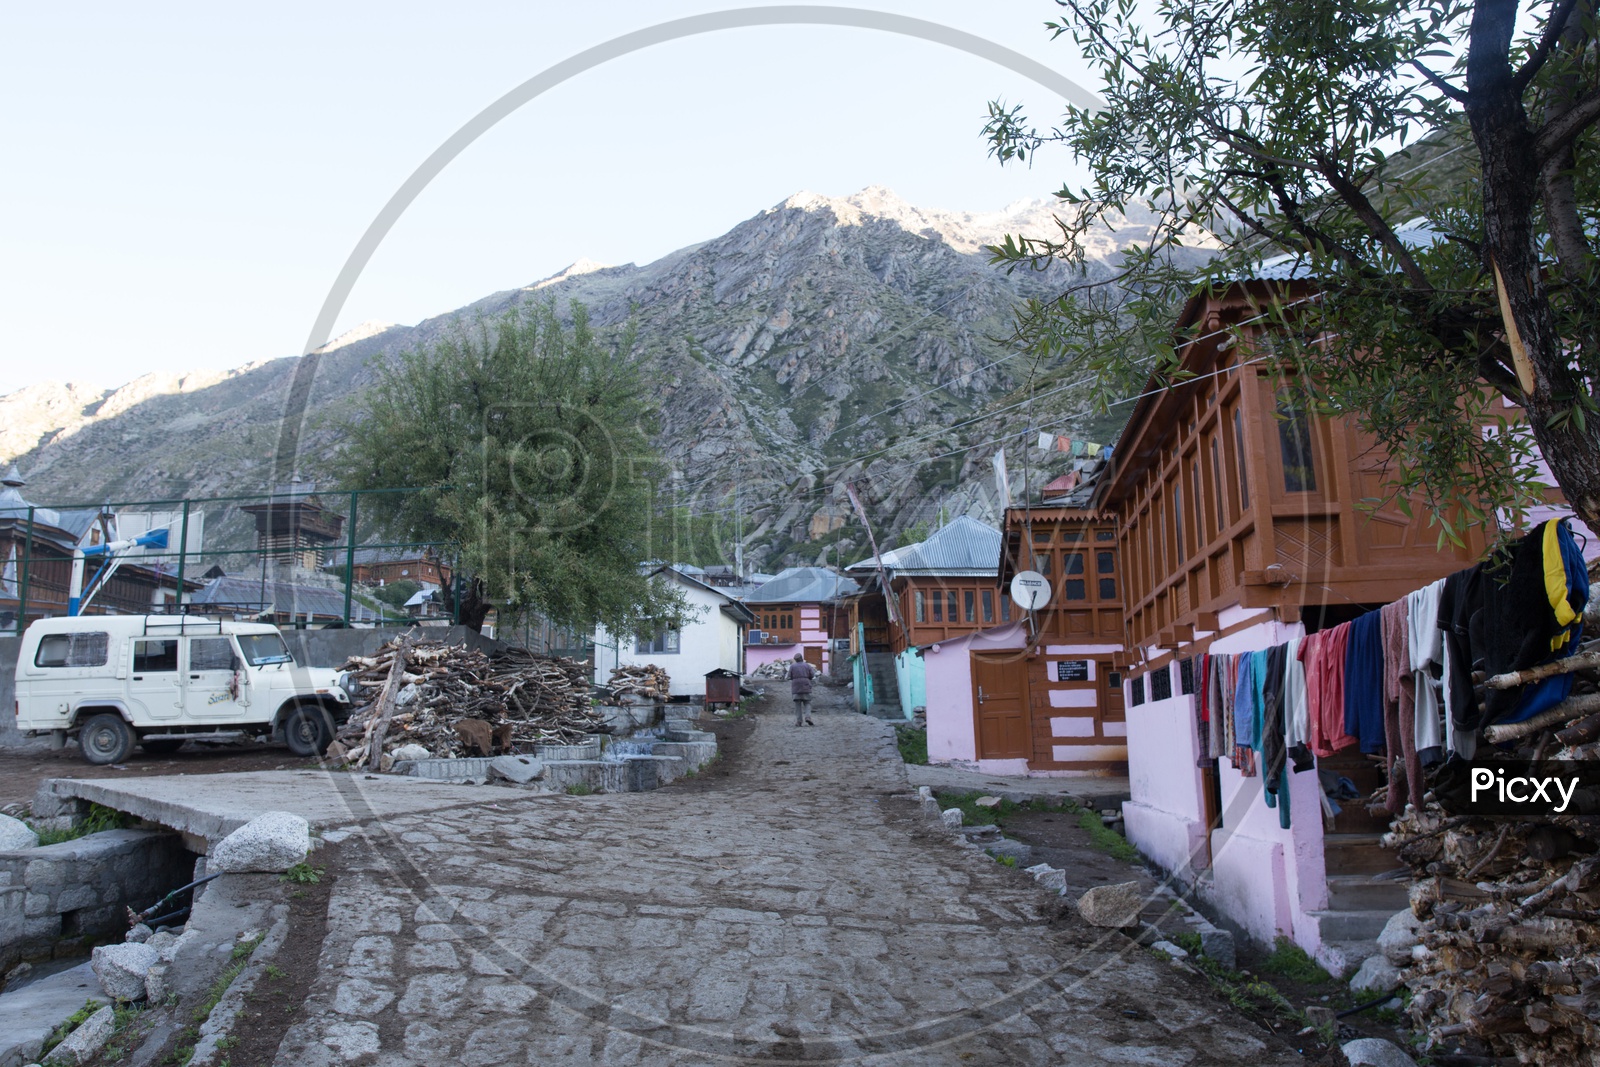 Streets  With Local People In The Villages Of Spiti Valley